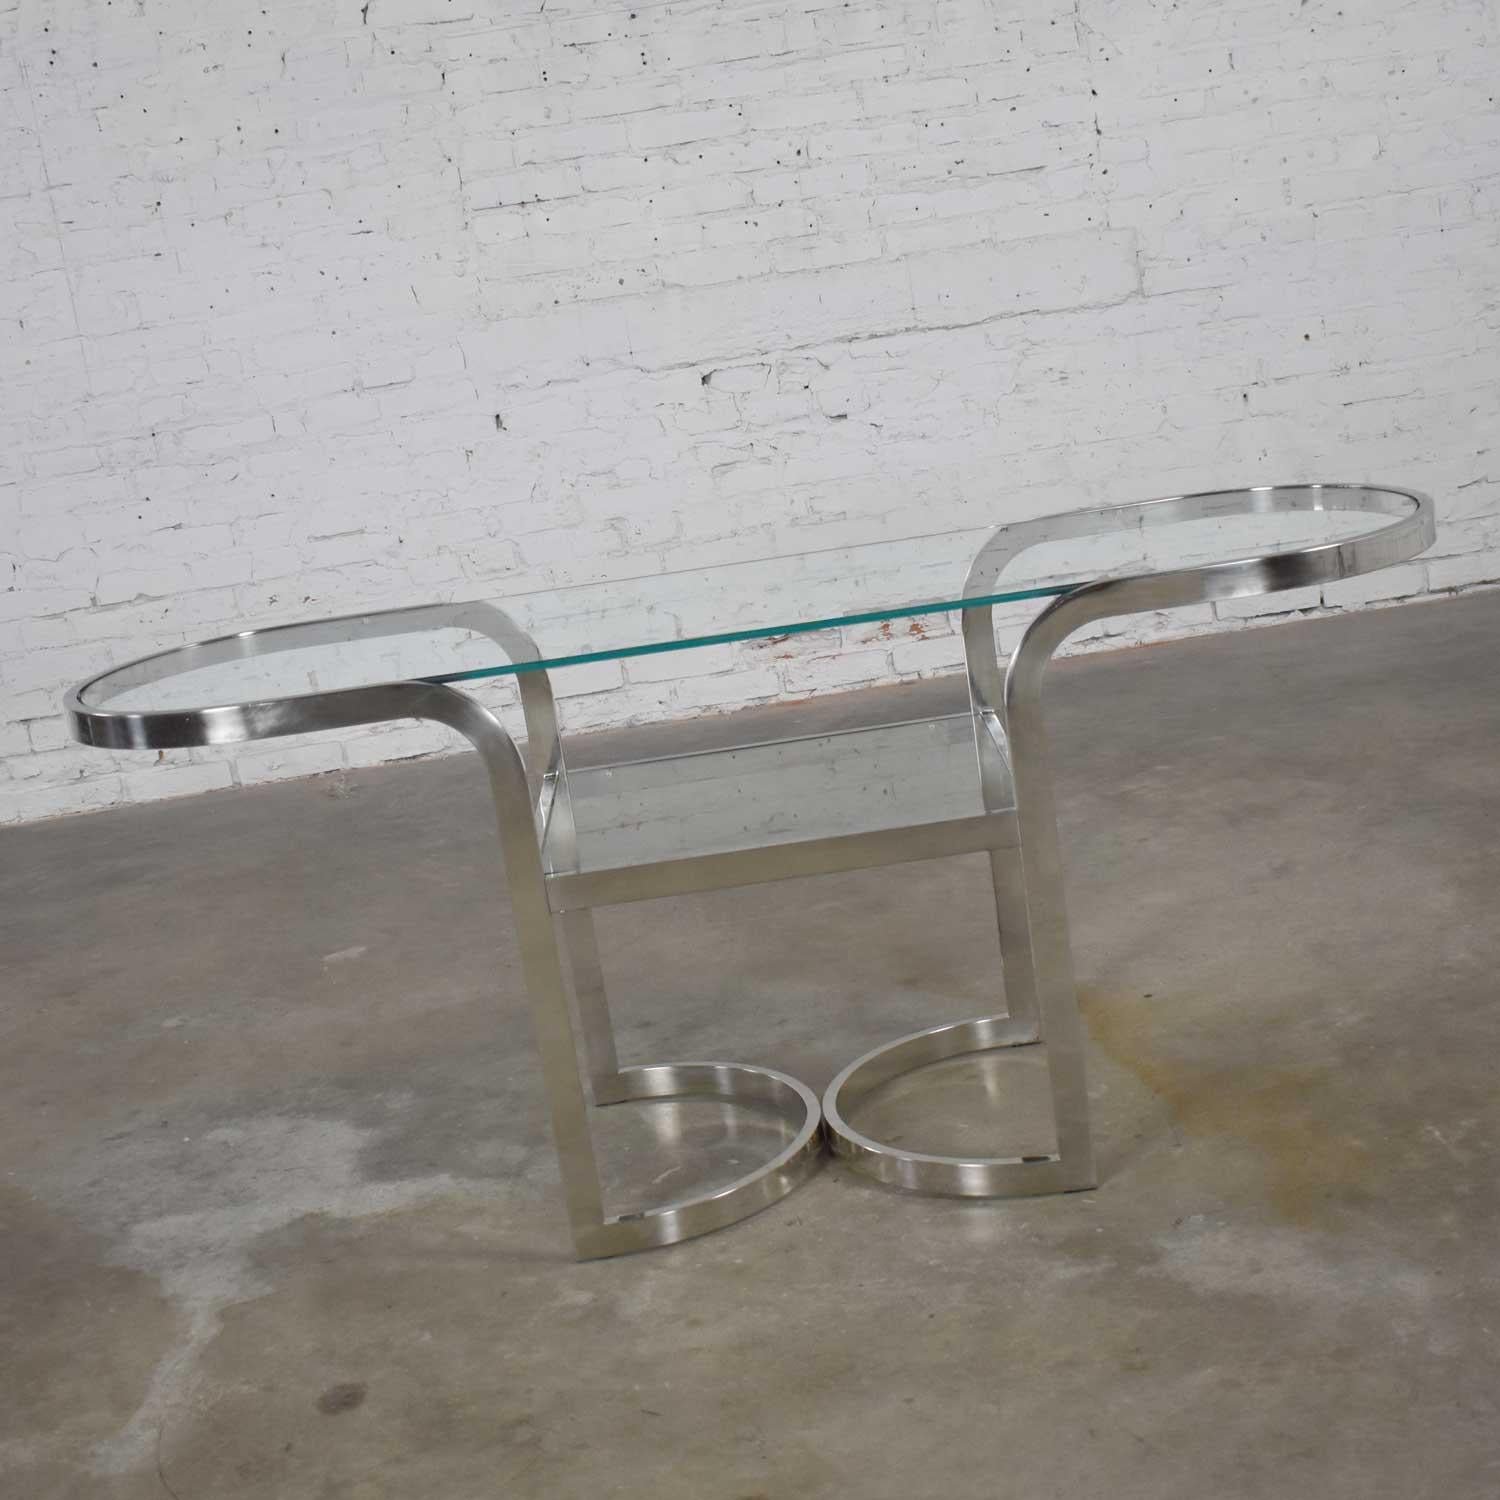 Fabulous Mid-Century Modern polished chrome sofa or console table, lower shelf with glass insert, and oval glass top. Gorgeous condition with wear consistent with age as expected with vintage pieces. Please see photos. Circa 1970-1980.

You know